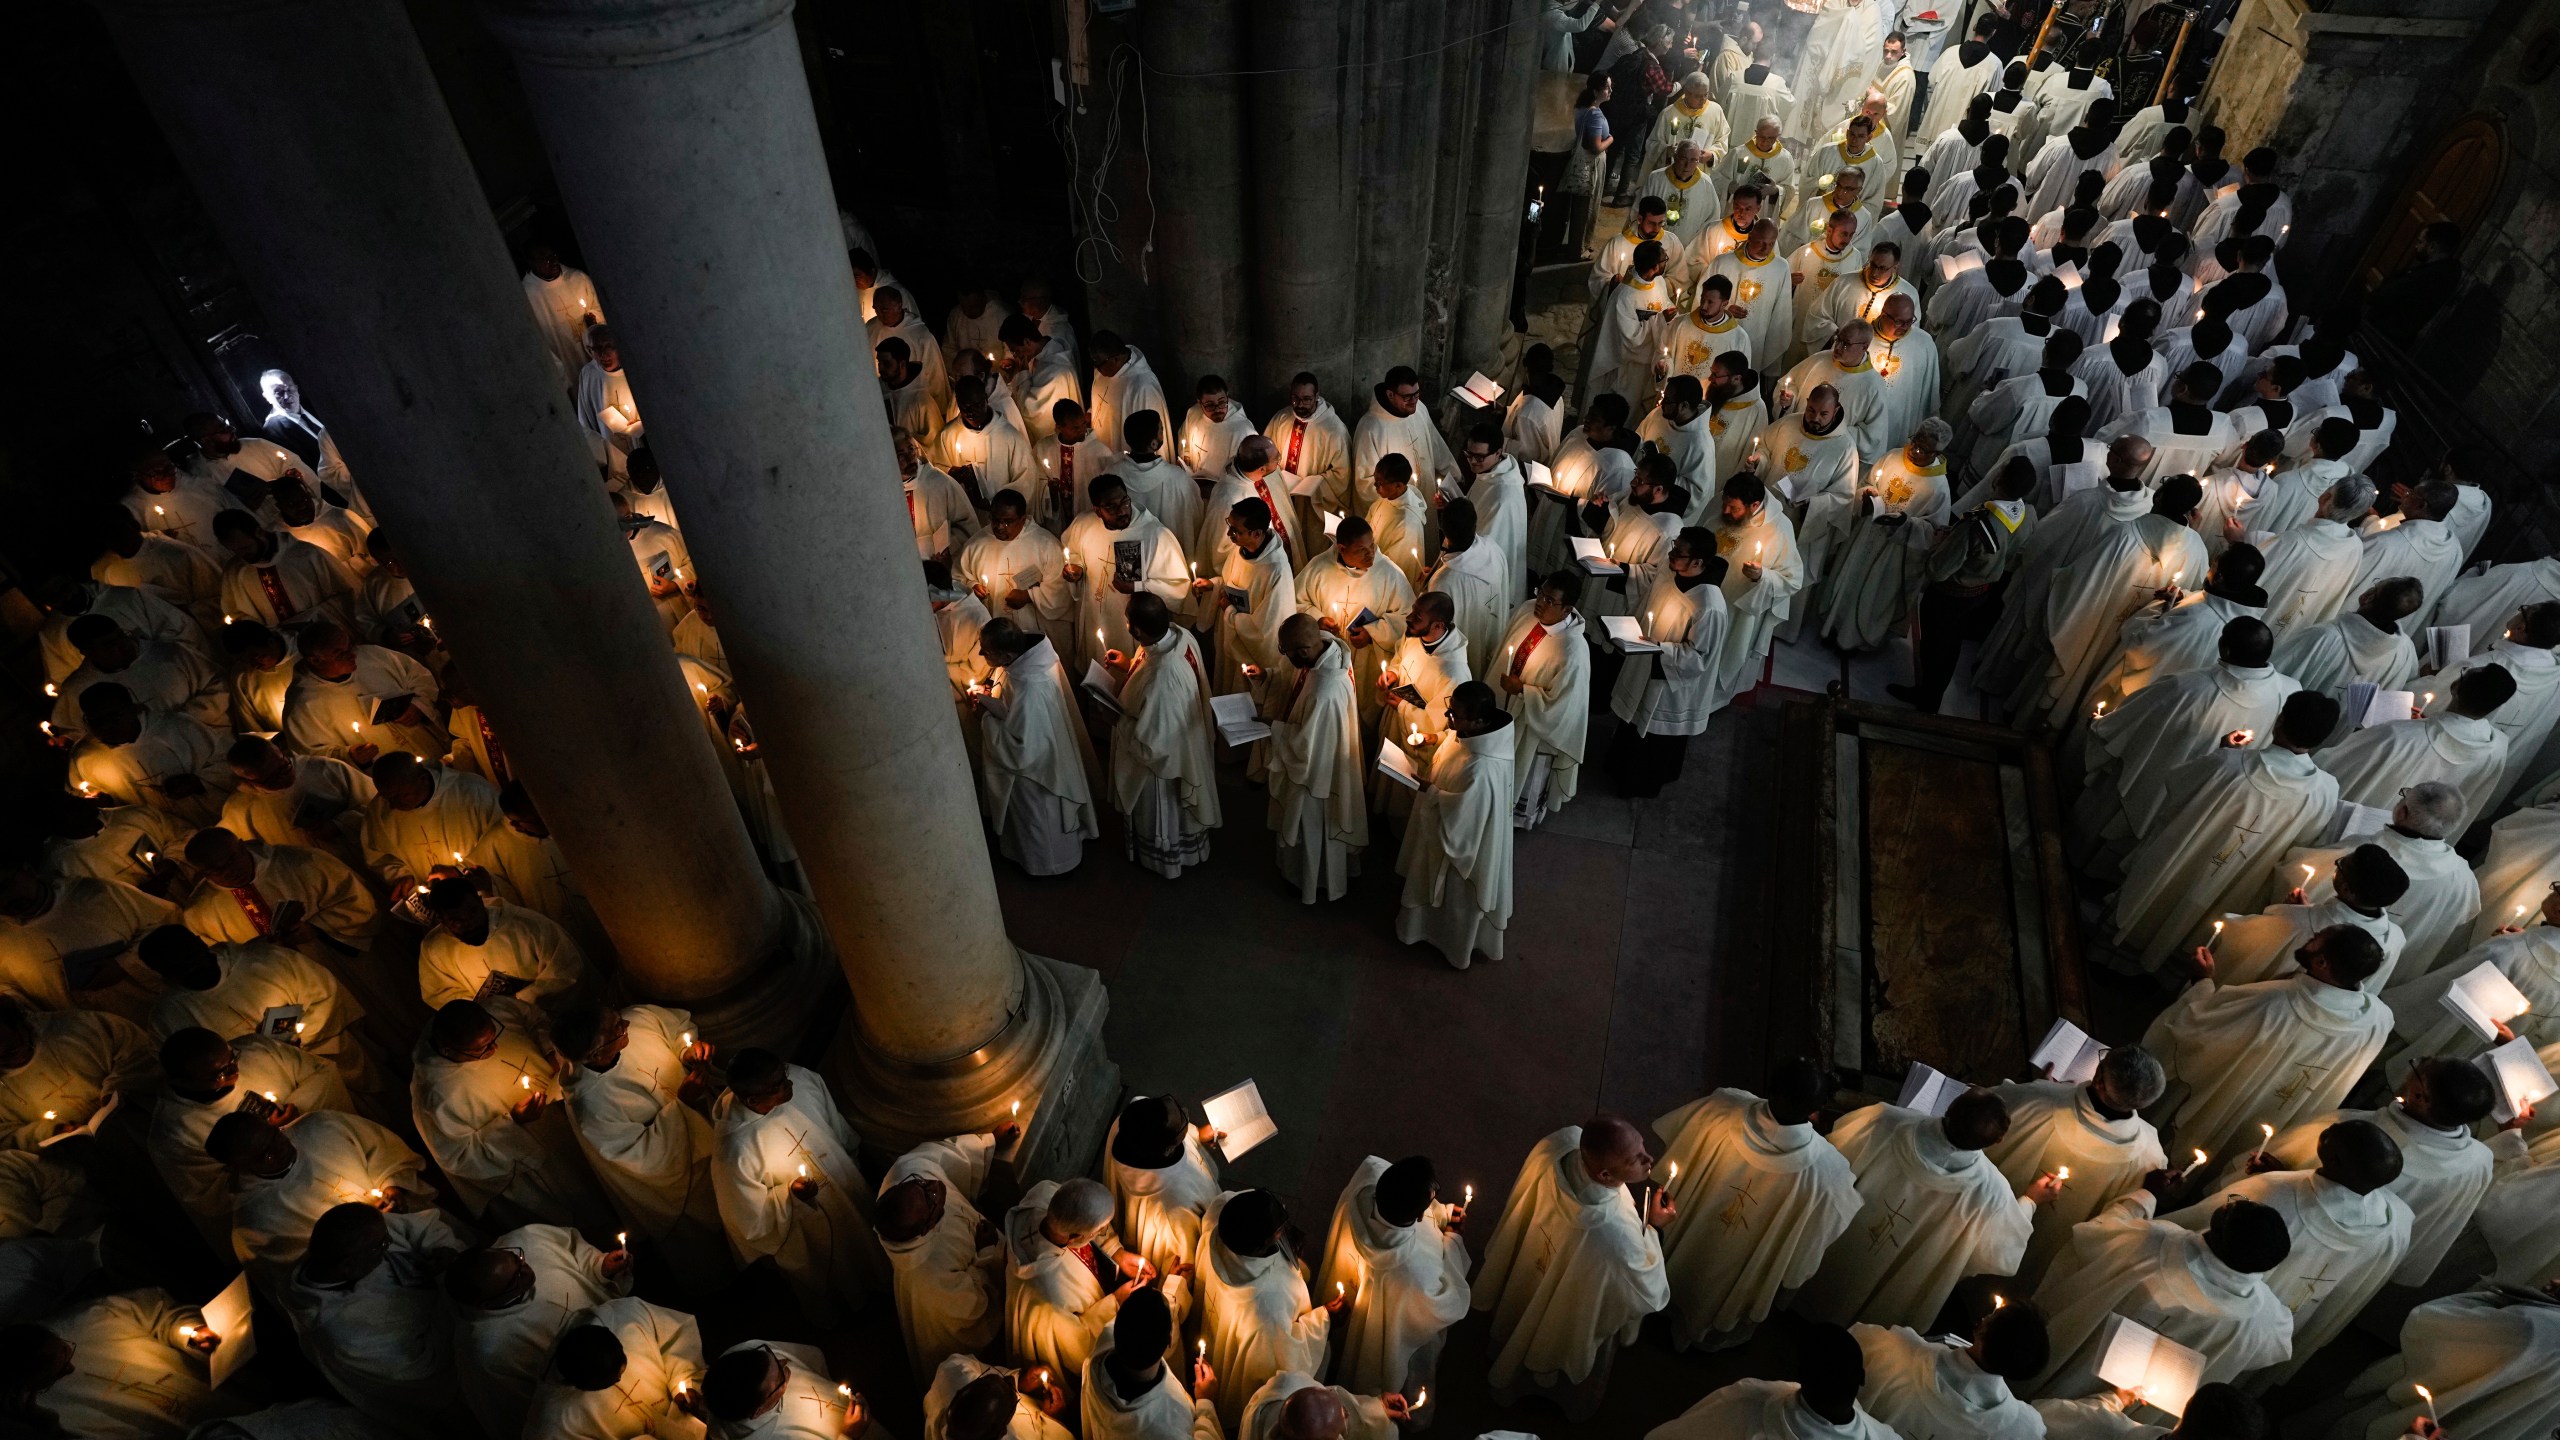 Catholic clergy hold candles as they walk during the Washing of the Feet procession at the Church of the Holy Sepulcher, where many Christians believe Jesus was crucified, buried, and rose from the dead, in the Old City of Jerusalem, Thursday, March 28, 2024. (AP Photo/Ohad Zwigenberg)